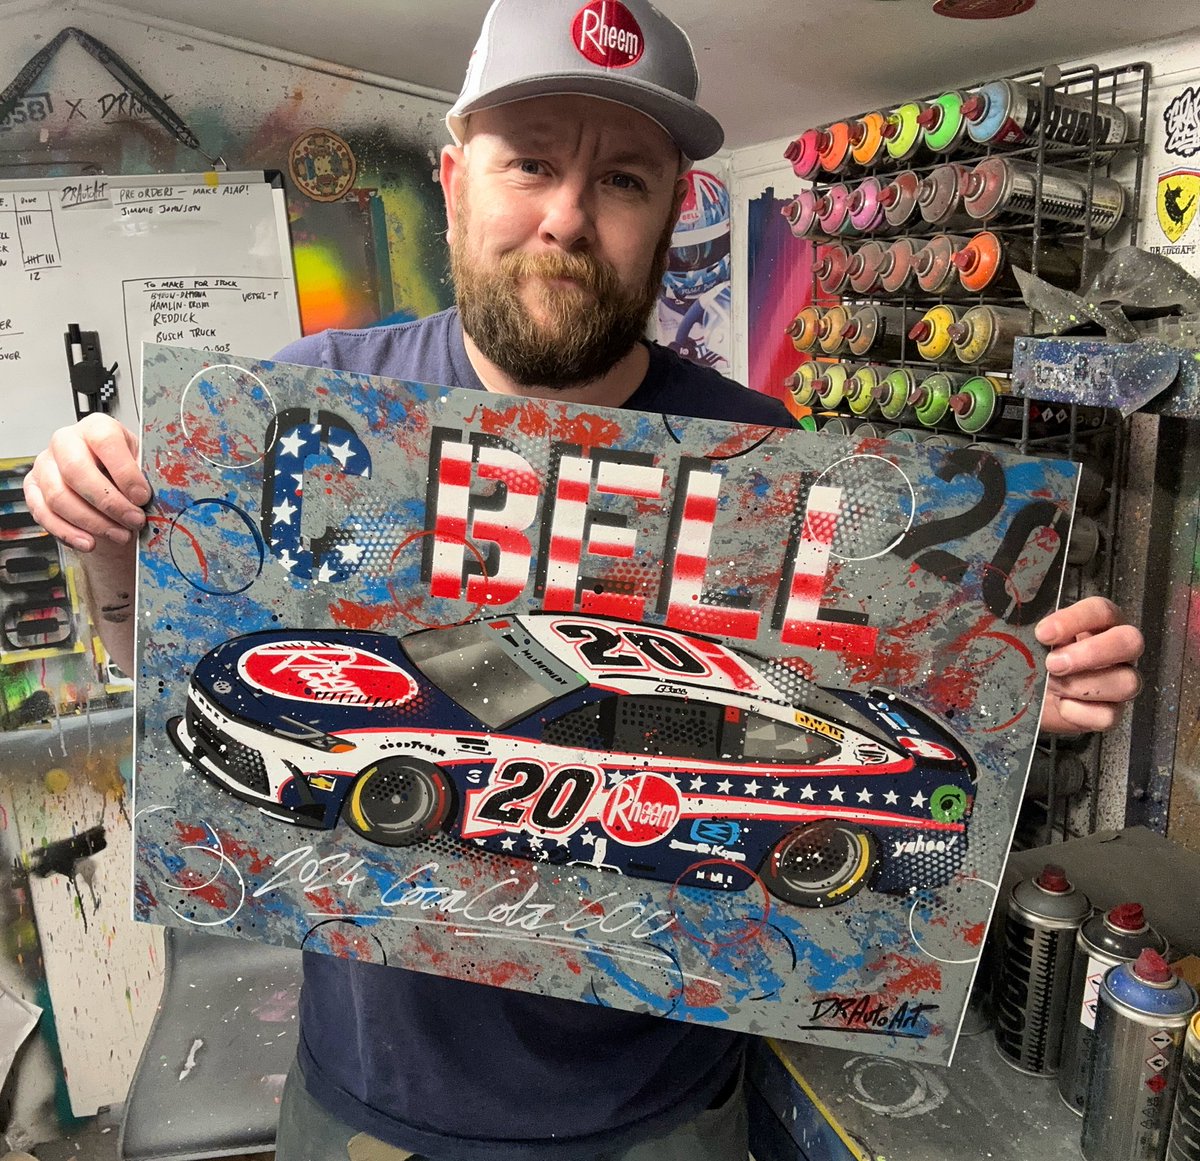 NASCAR Victory Monday. The winner of yesterday’s #cocacola600, Christopher Bell! This one is for the family of Tom Kennedy one Memorial Day weekend. Congrats @cbellracing, @rheemracing & @joegibbsracing 🍾💪🏻 #drautoart

#christopherbell  #rheemracing #nascar #joegibbsracing #cb20